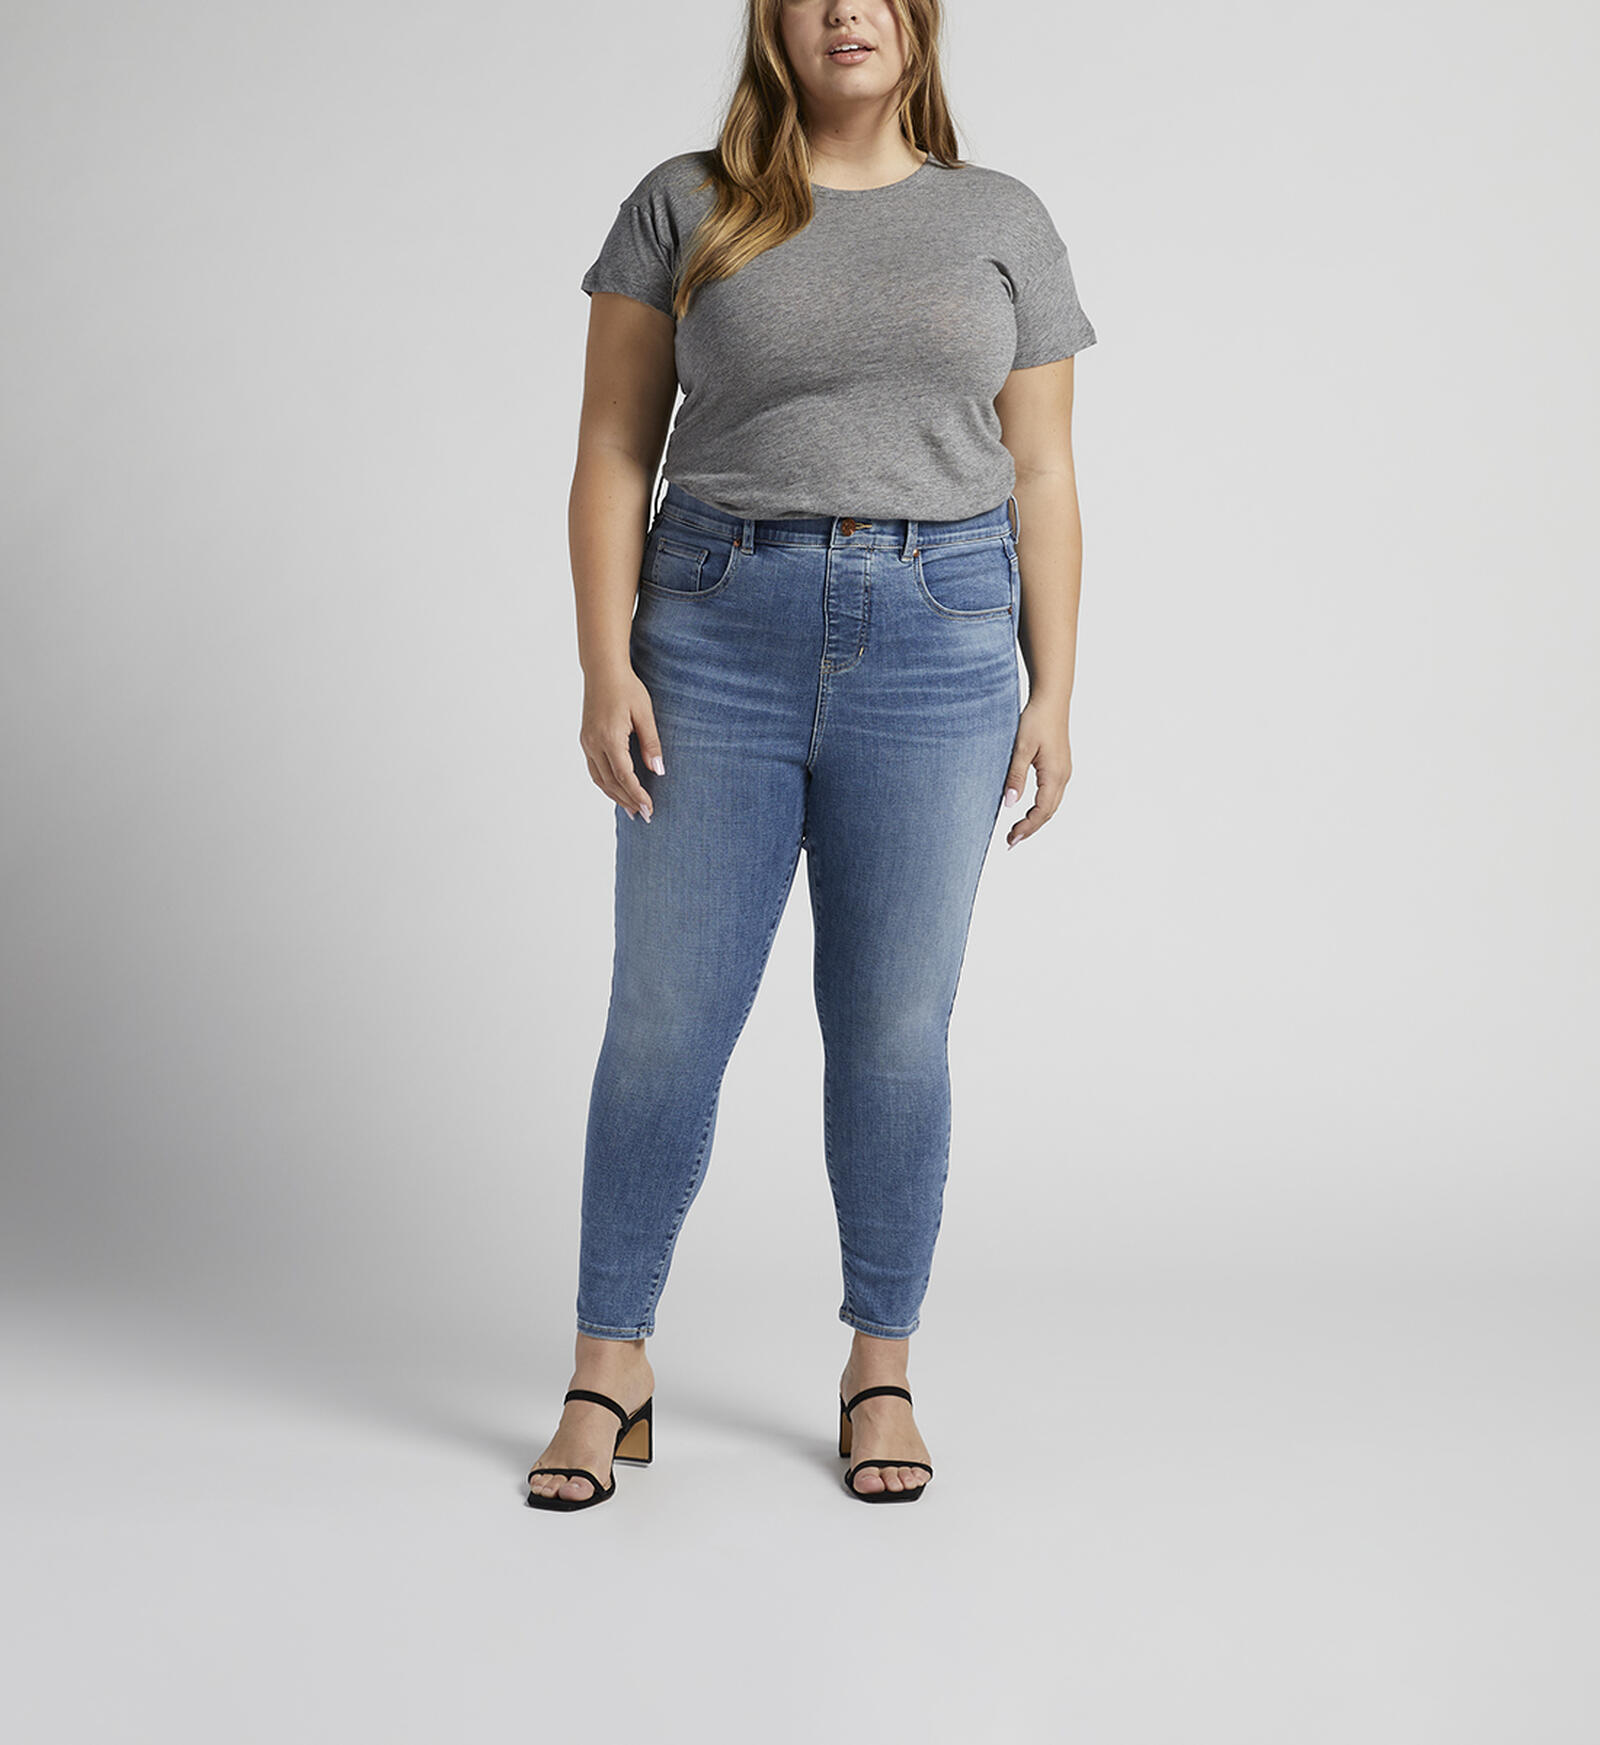 Buy Valentina High Rise Skinny Crop Pull-On Jeans Plus Size for CAD 68.00